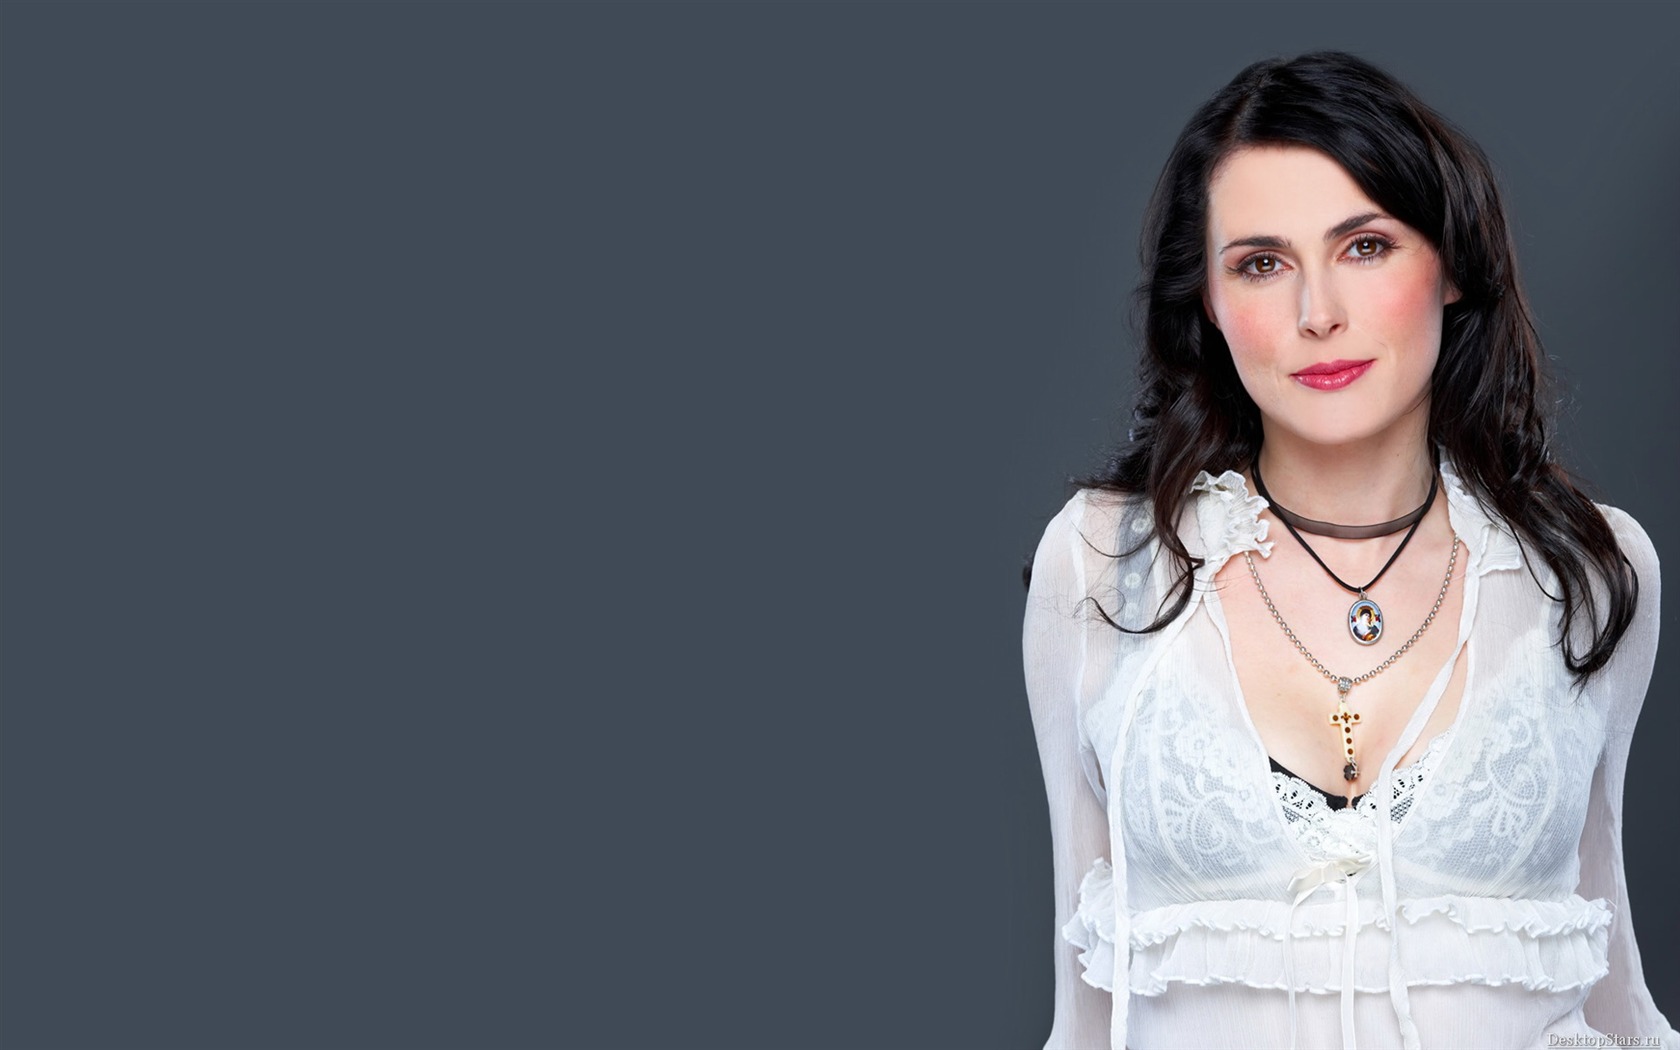 Sharon den Adel #006 - 1680x1050 Wallpapers Pictures Photos Images